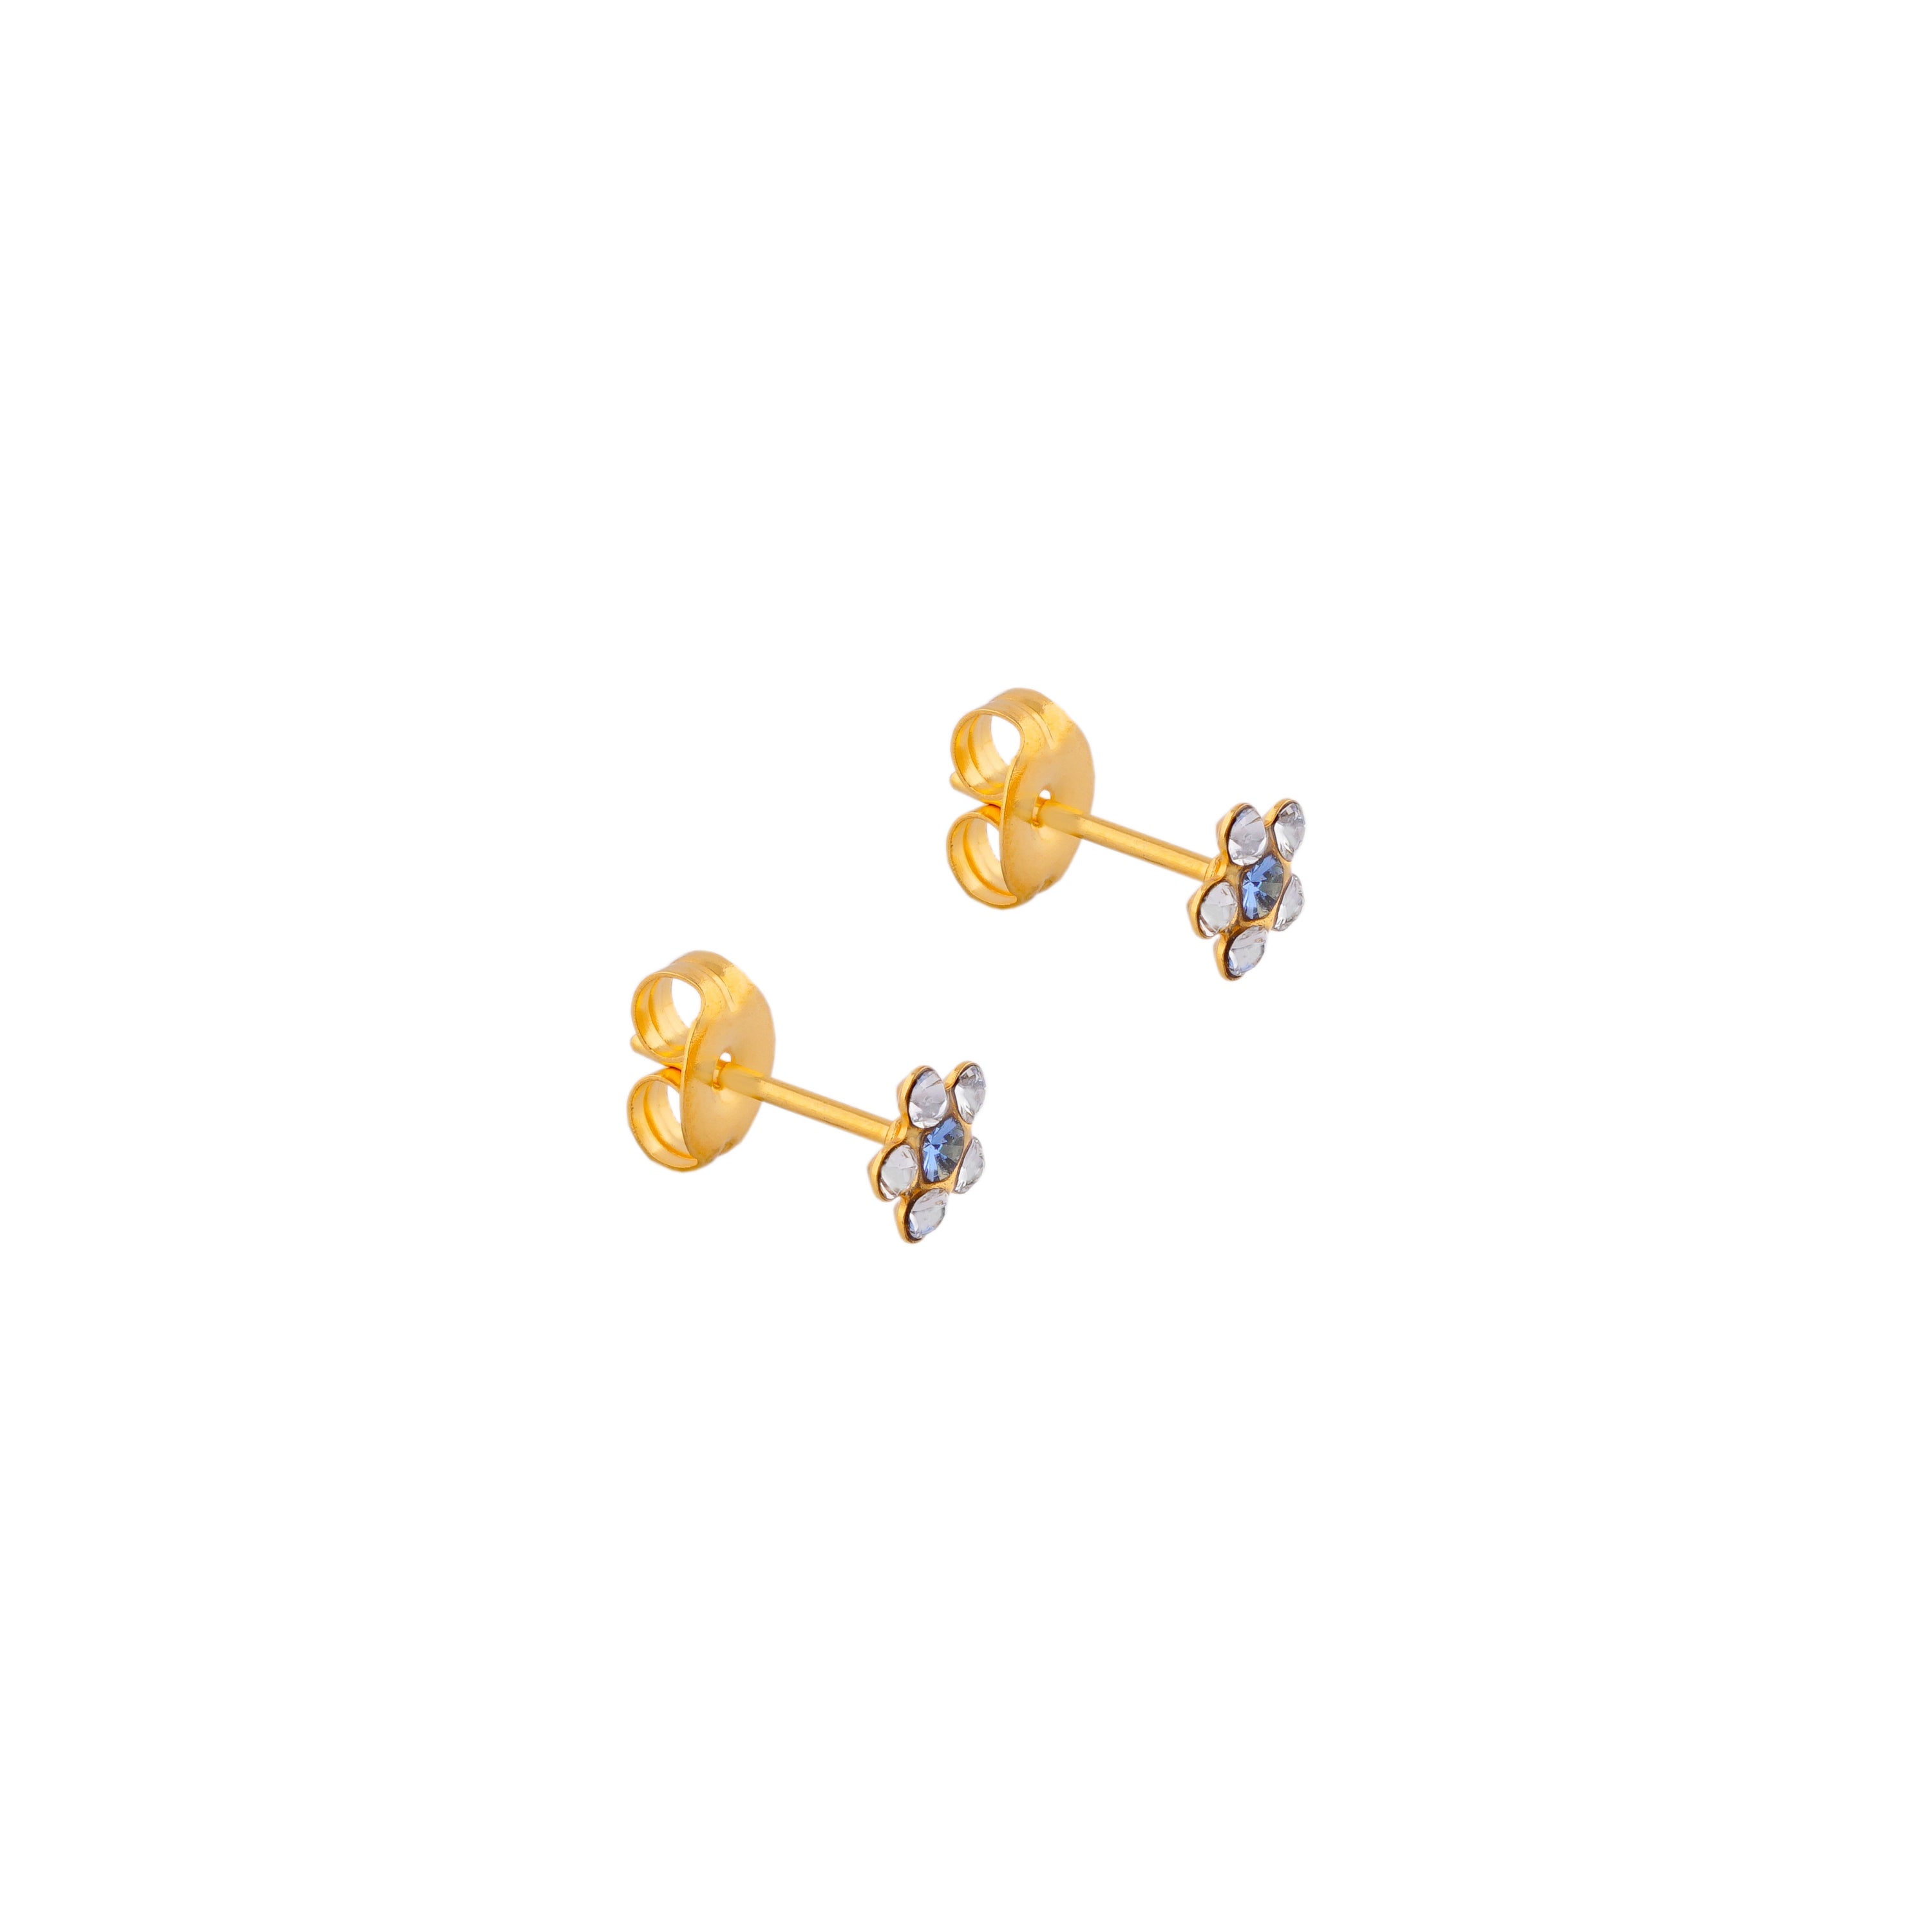 Daisy April Crystal- September Sapphire 24K Pure Gold Plated Ear Studs For Kids